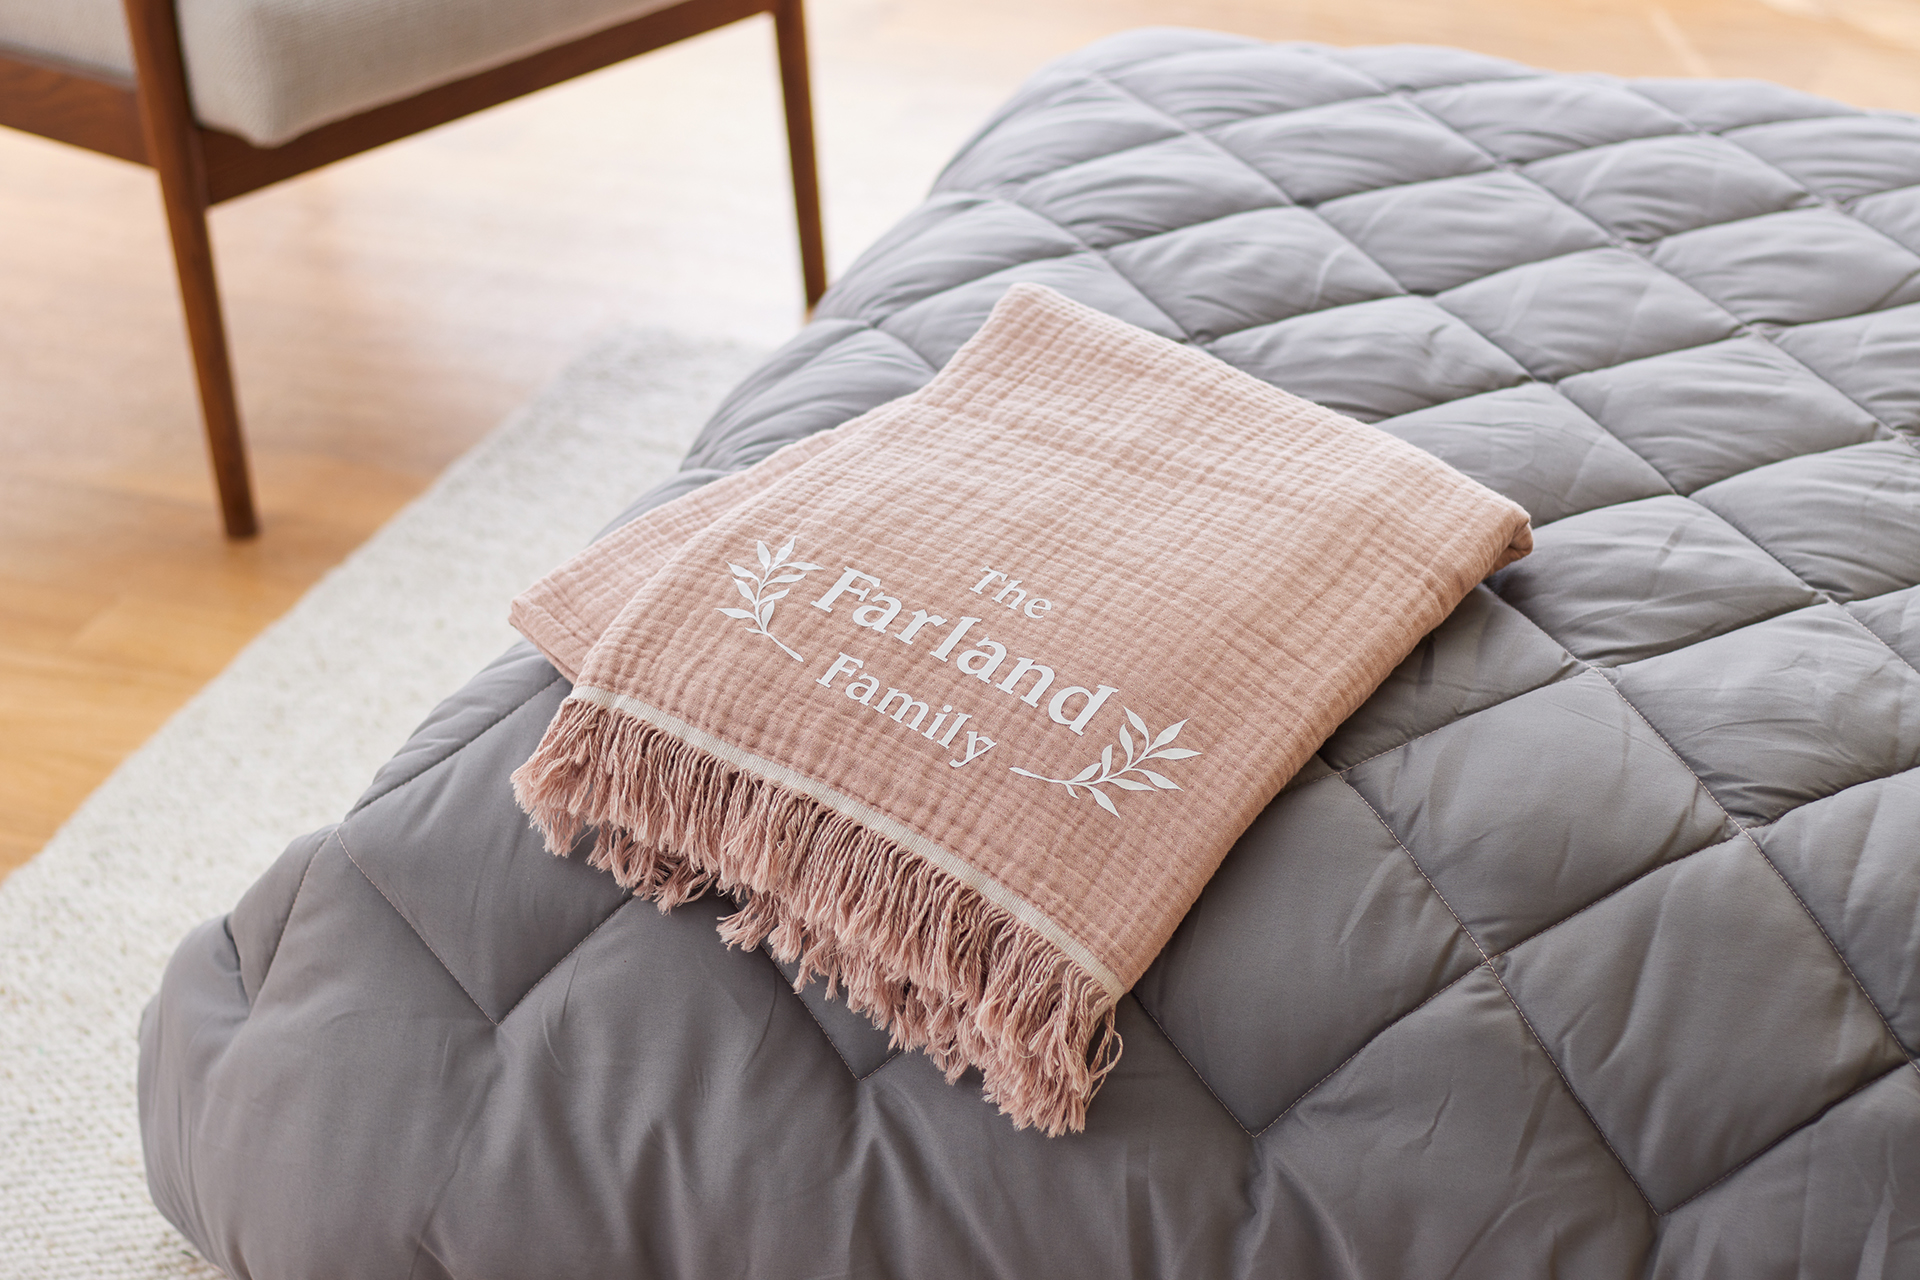 Brown blanket with the words "The Farland Family" on a corner of a bed